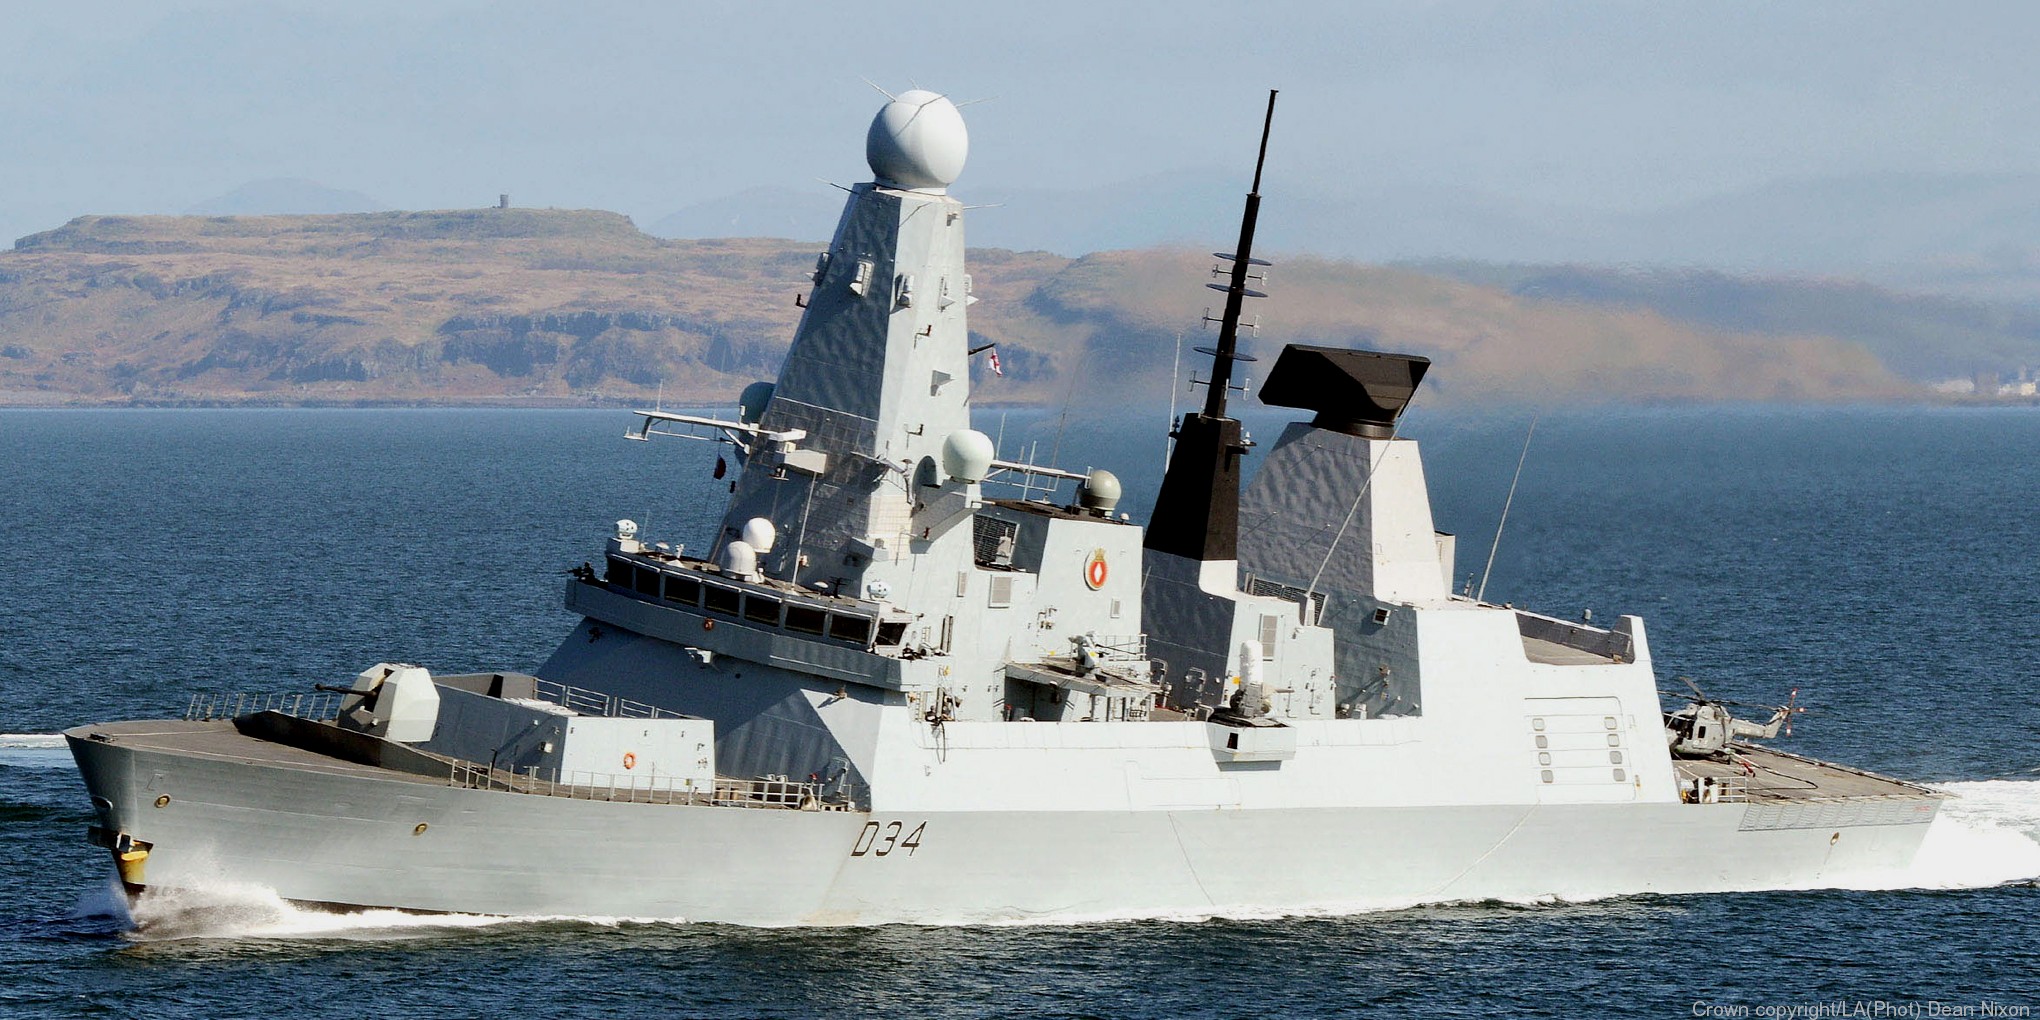 hms diamond d-34 type 45 daring class guided missile destroyer ddg royal navy sea viper paams 09